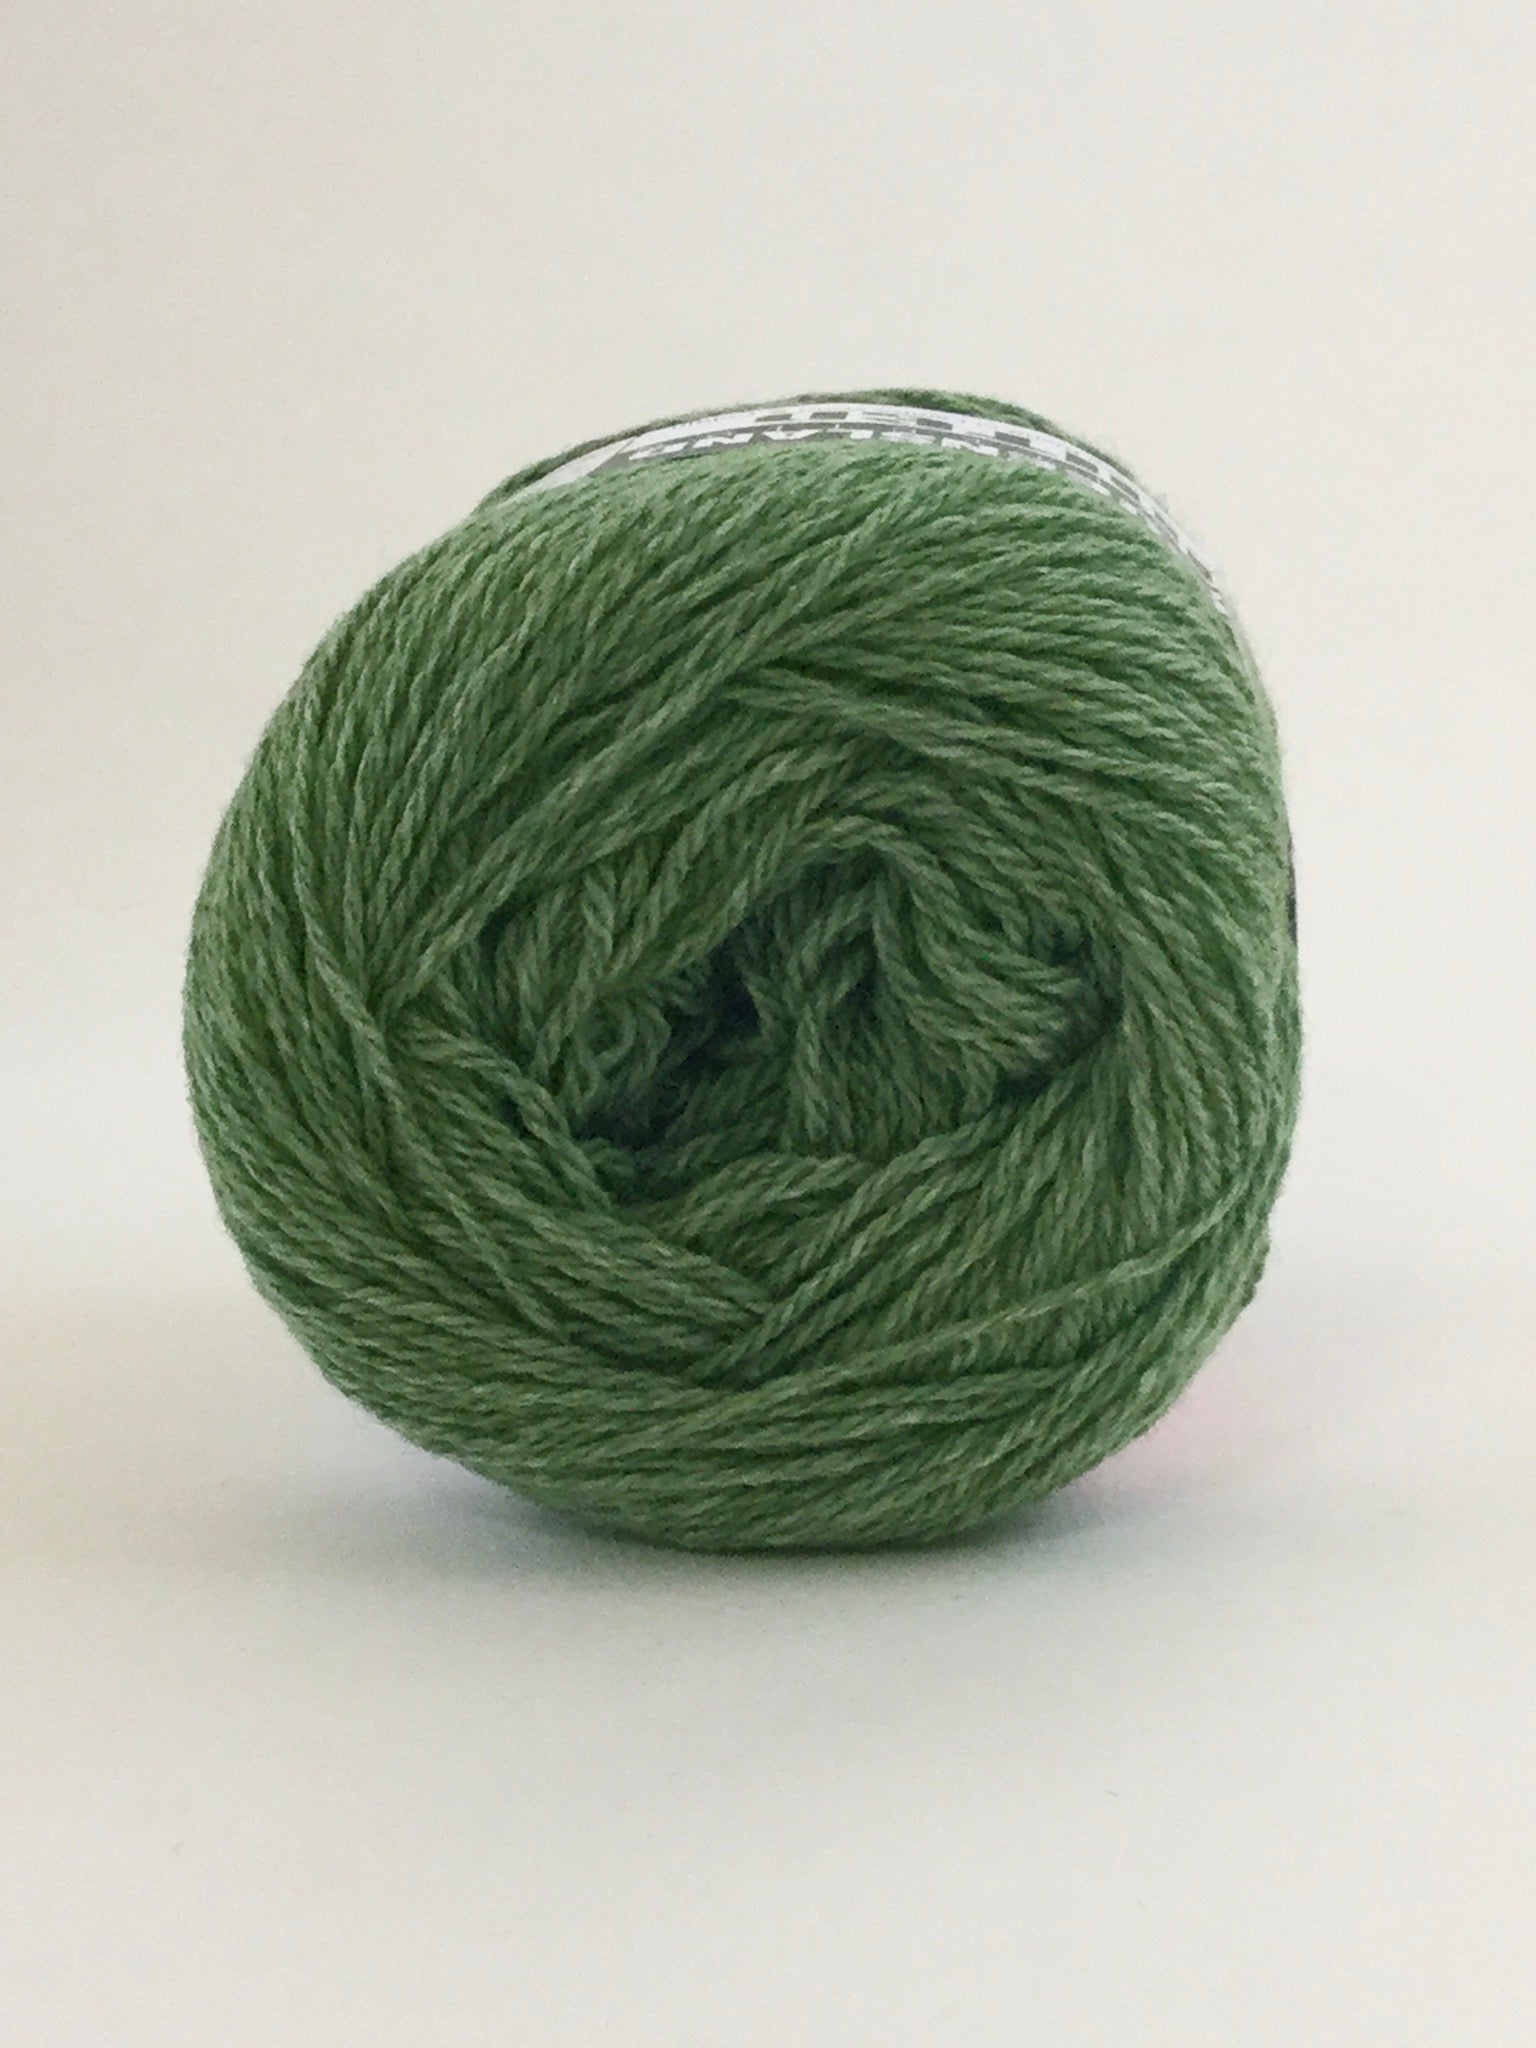 United yarn from Queensland Collection